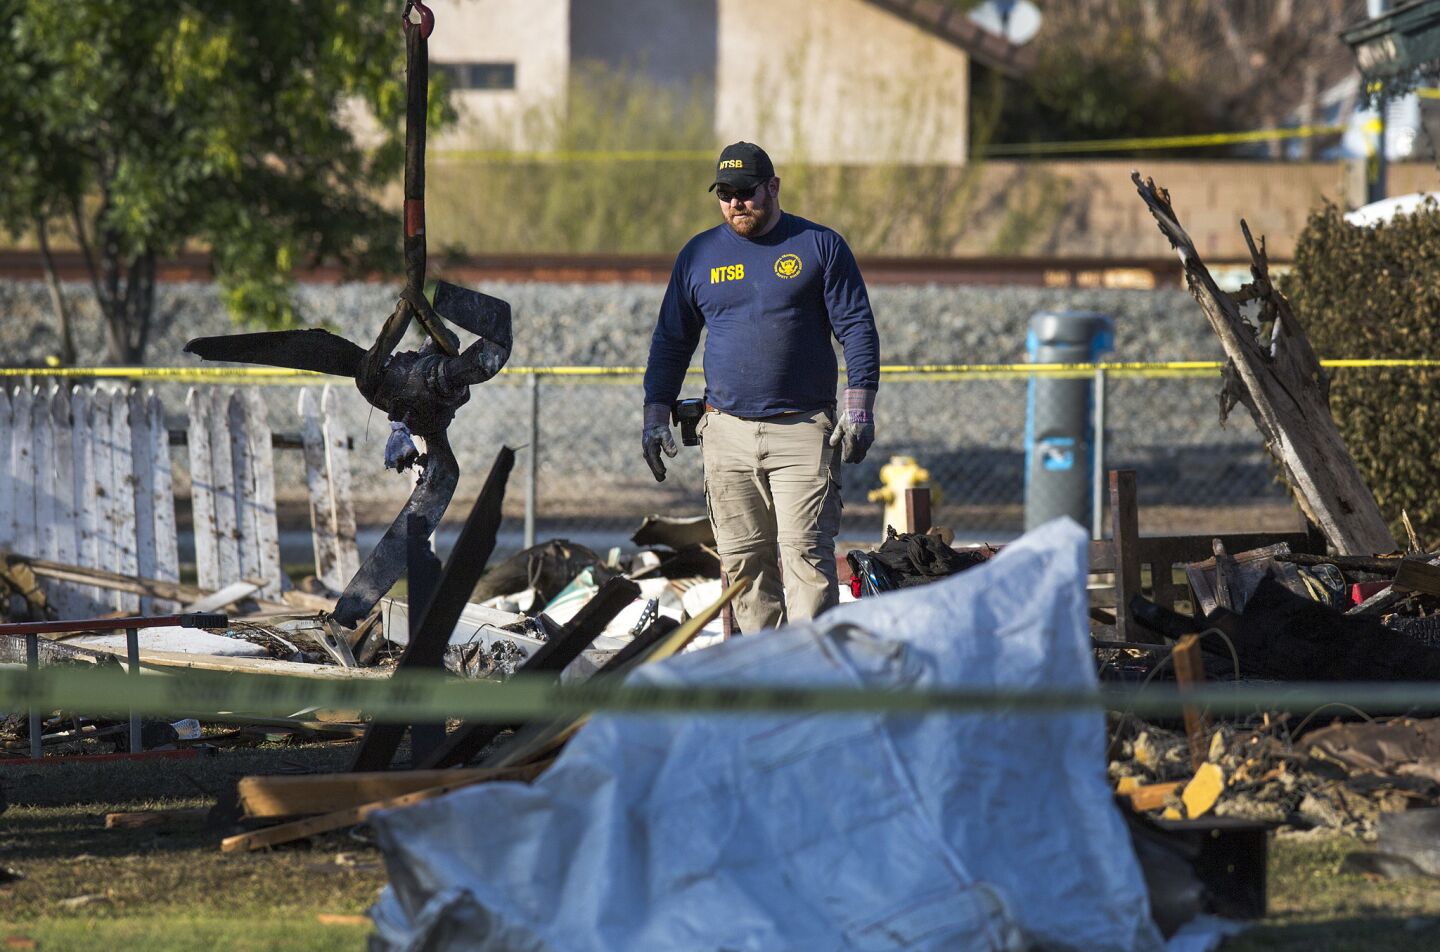 An NTSB agent watches as a small hoist lifts a propeller out of the front-yard wreckage the day after a small plane crashed into a Riverside home, killing three people.